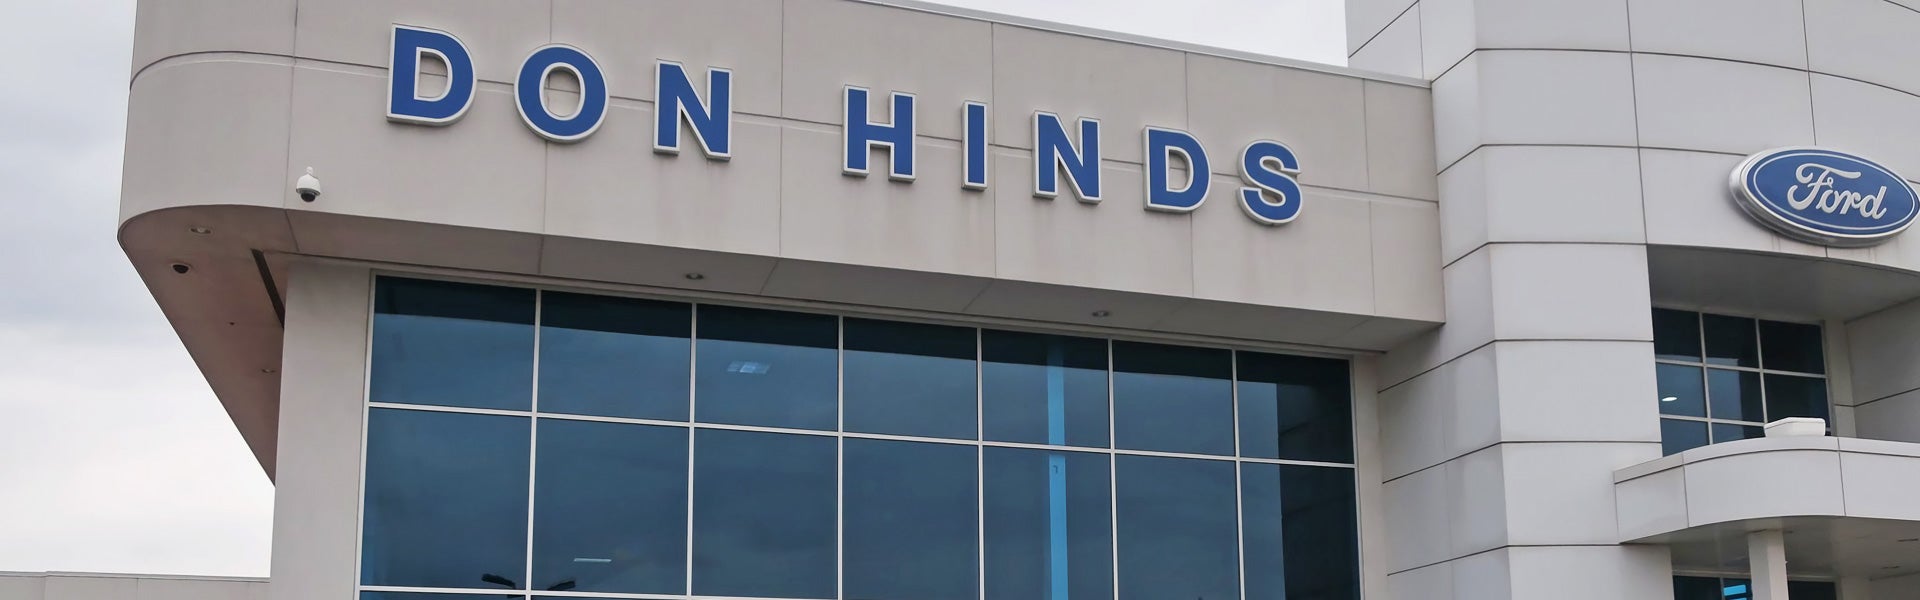 Don Hinds Ford Has Over Sixty Years of Experience